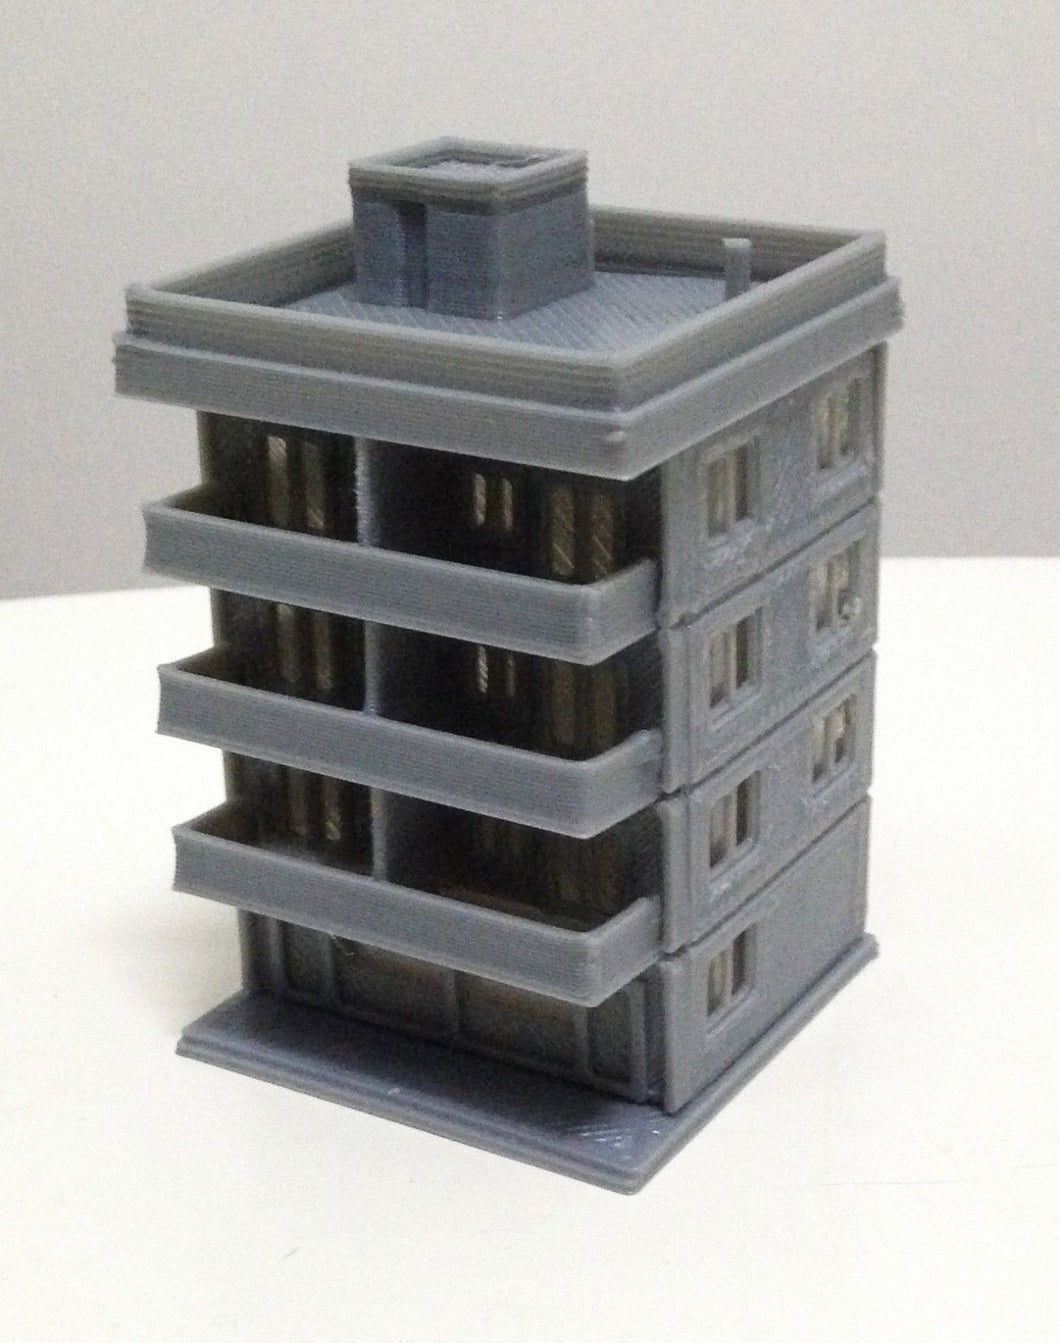 Modern City Building 4-Story Apartment Z Scale 1:220 Outland Models Railway